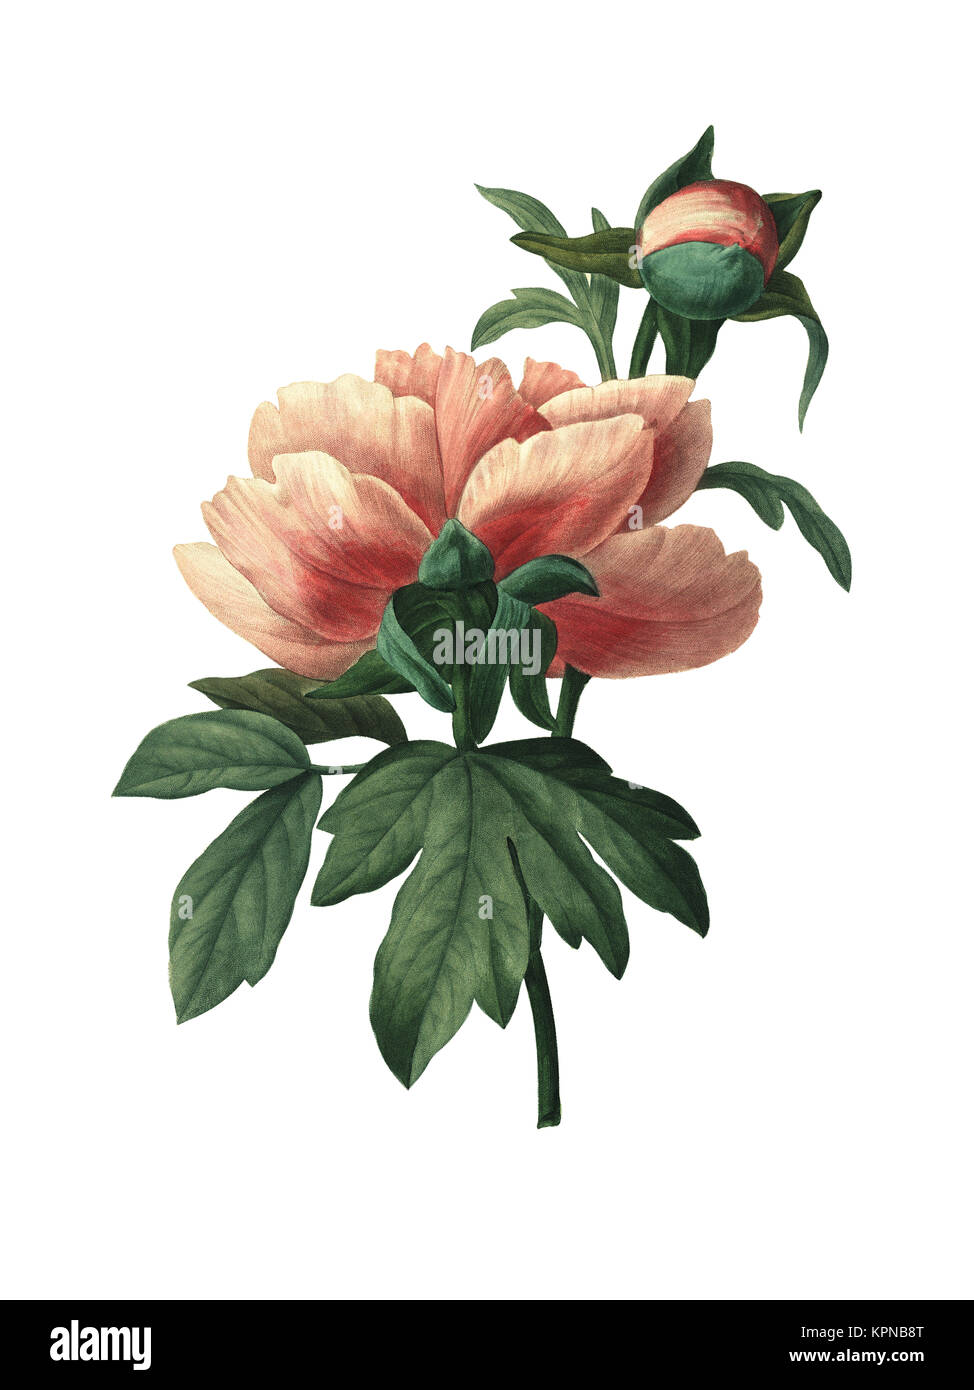 19th-century illustration of a Chinese peony. Engraving by Pierre-Joseph Redoute. Published in Choix Des Plus Belles Fleurs, Paris (1827). Stock Photo